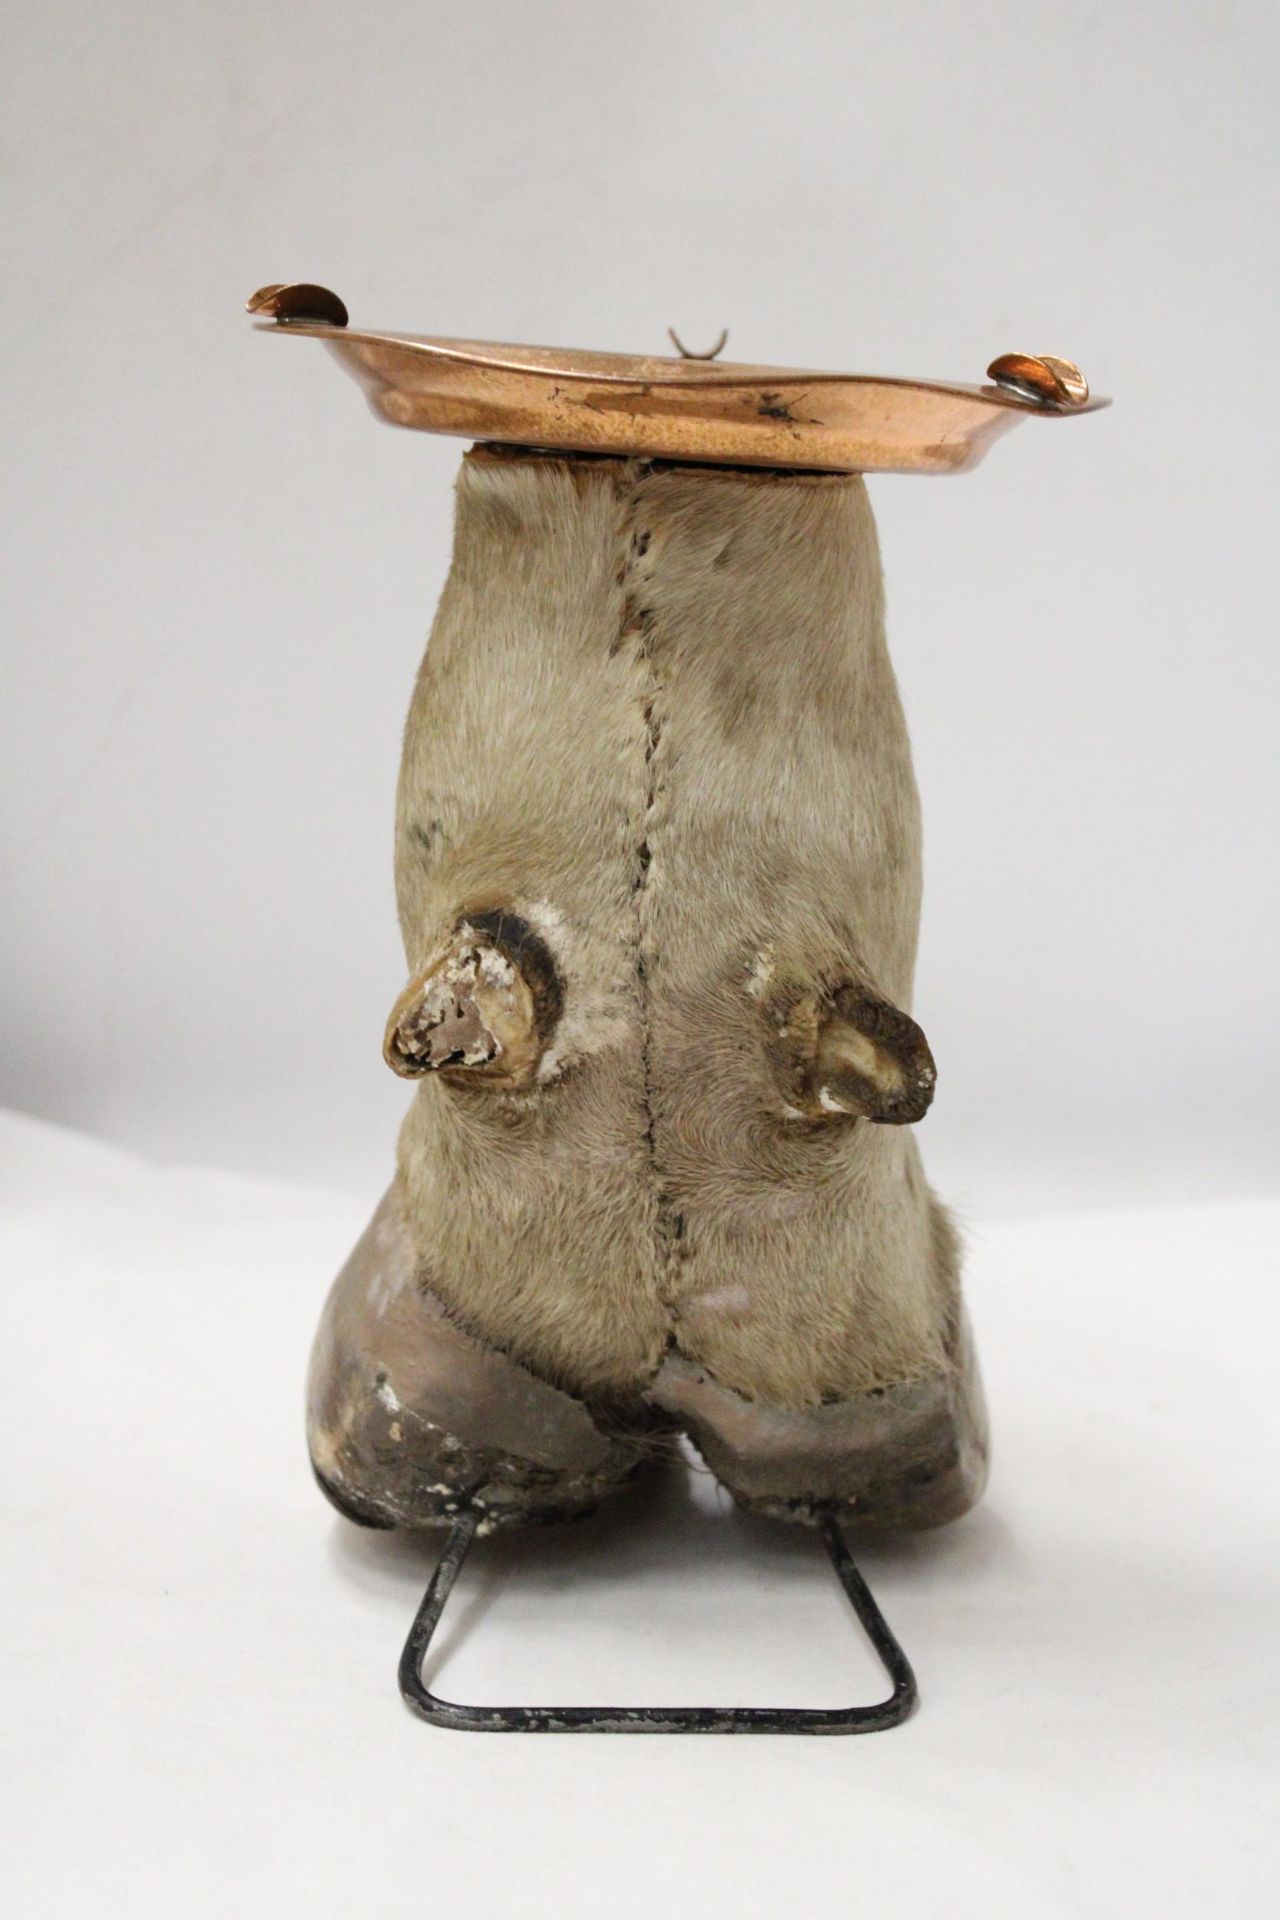 A COWS HOOF WITH COPPER ASHTRAY - Image 4 of 6